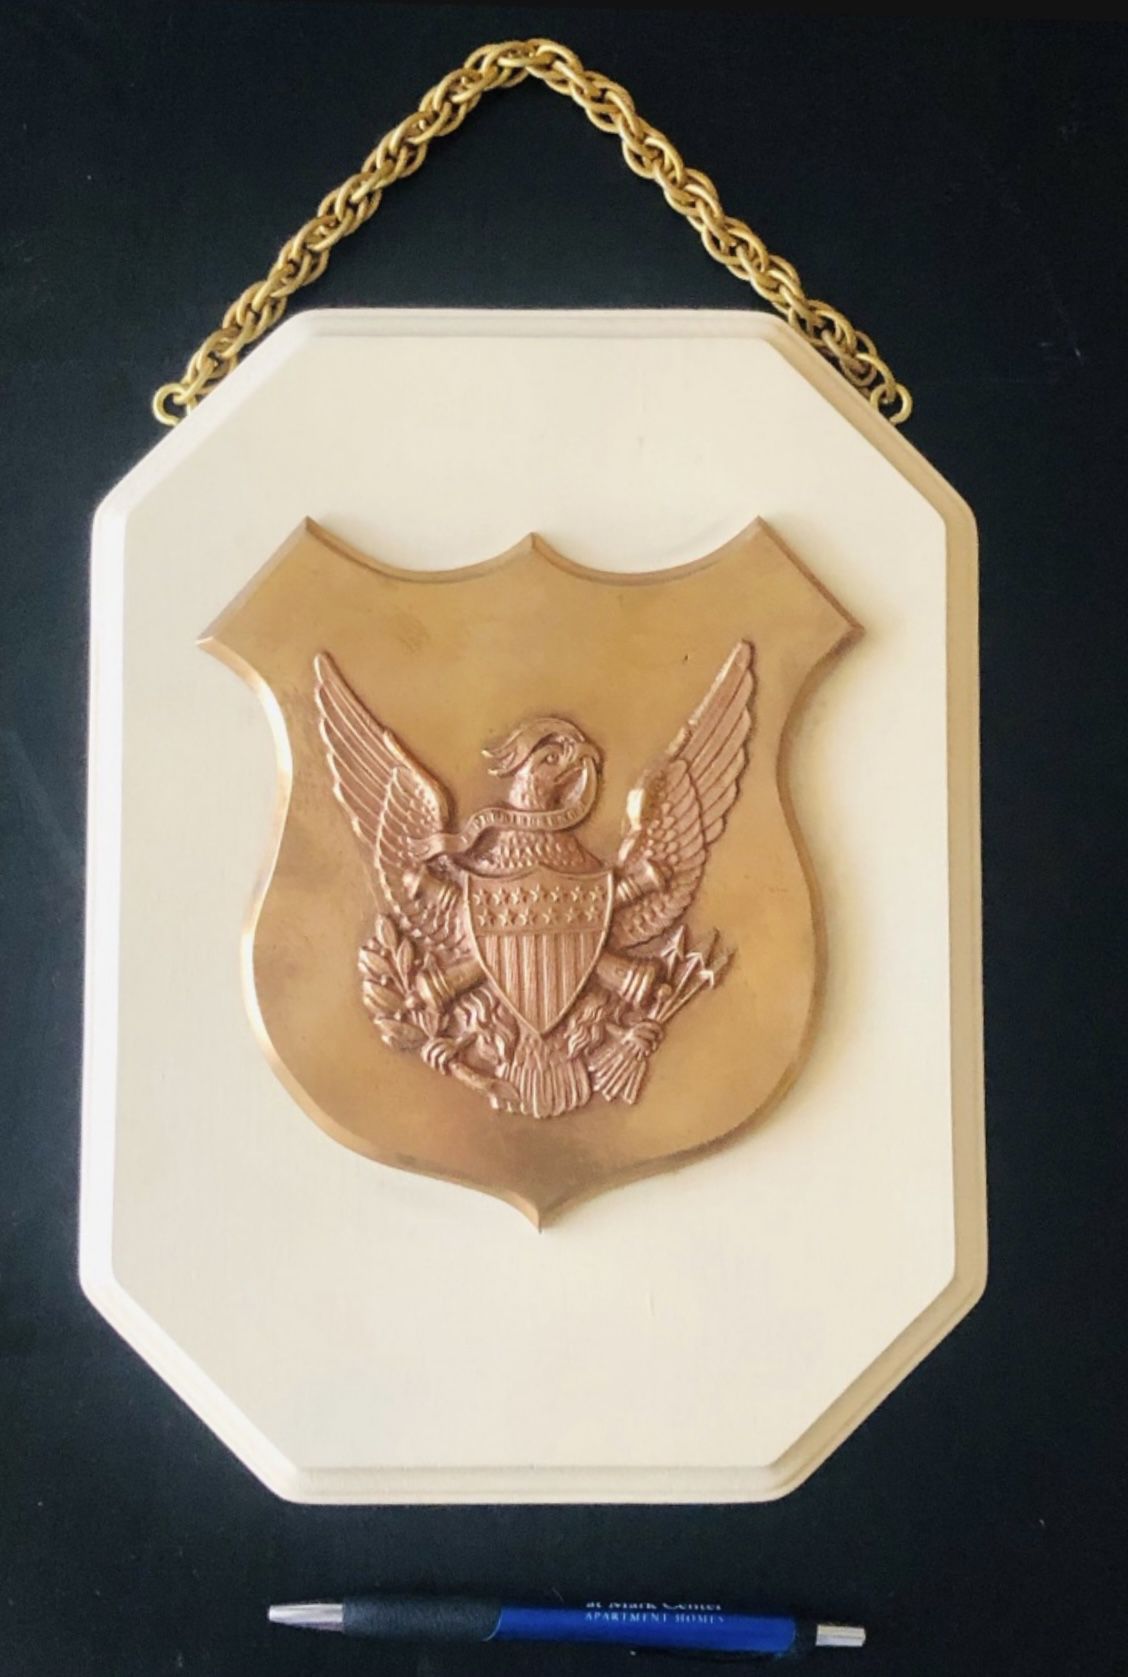 Vintage Large Rare American Artillery Eagle Plaque From 1890 To 1910 WW1 